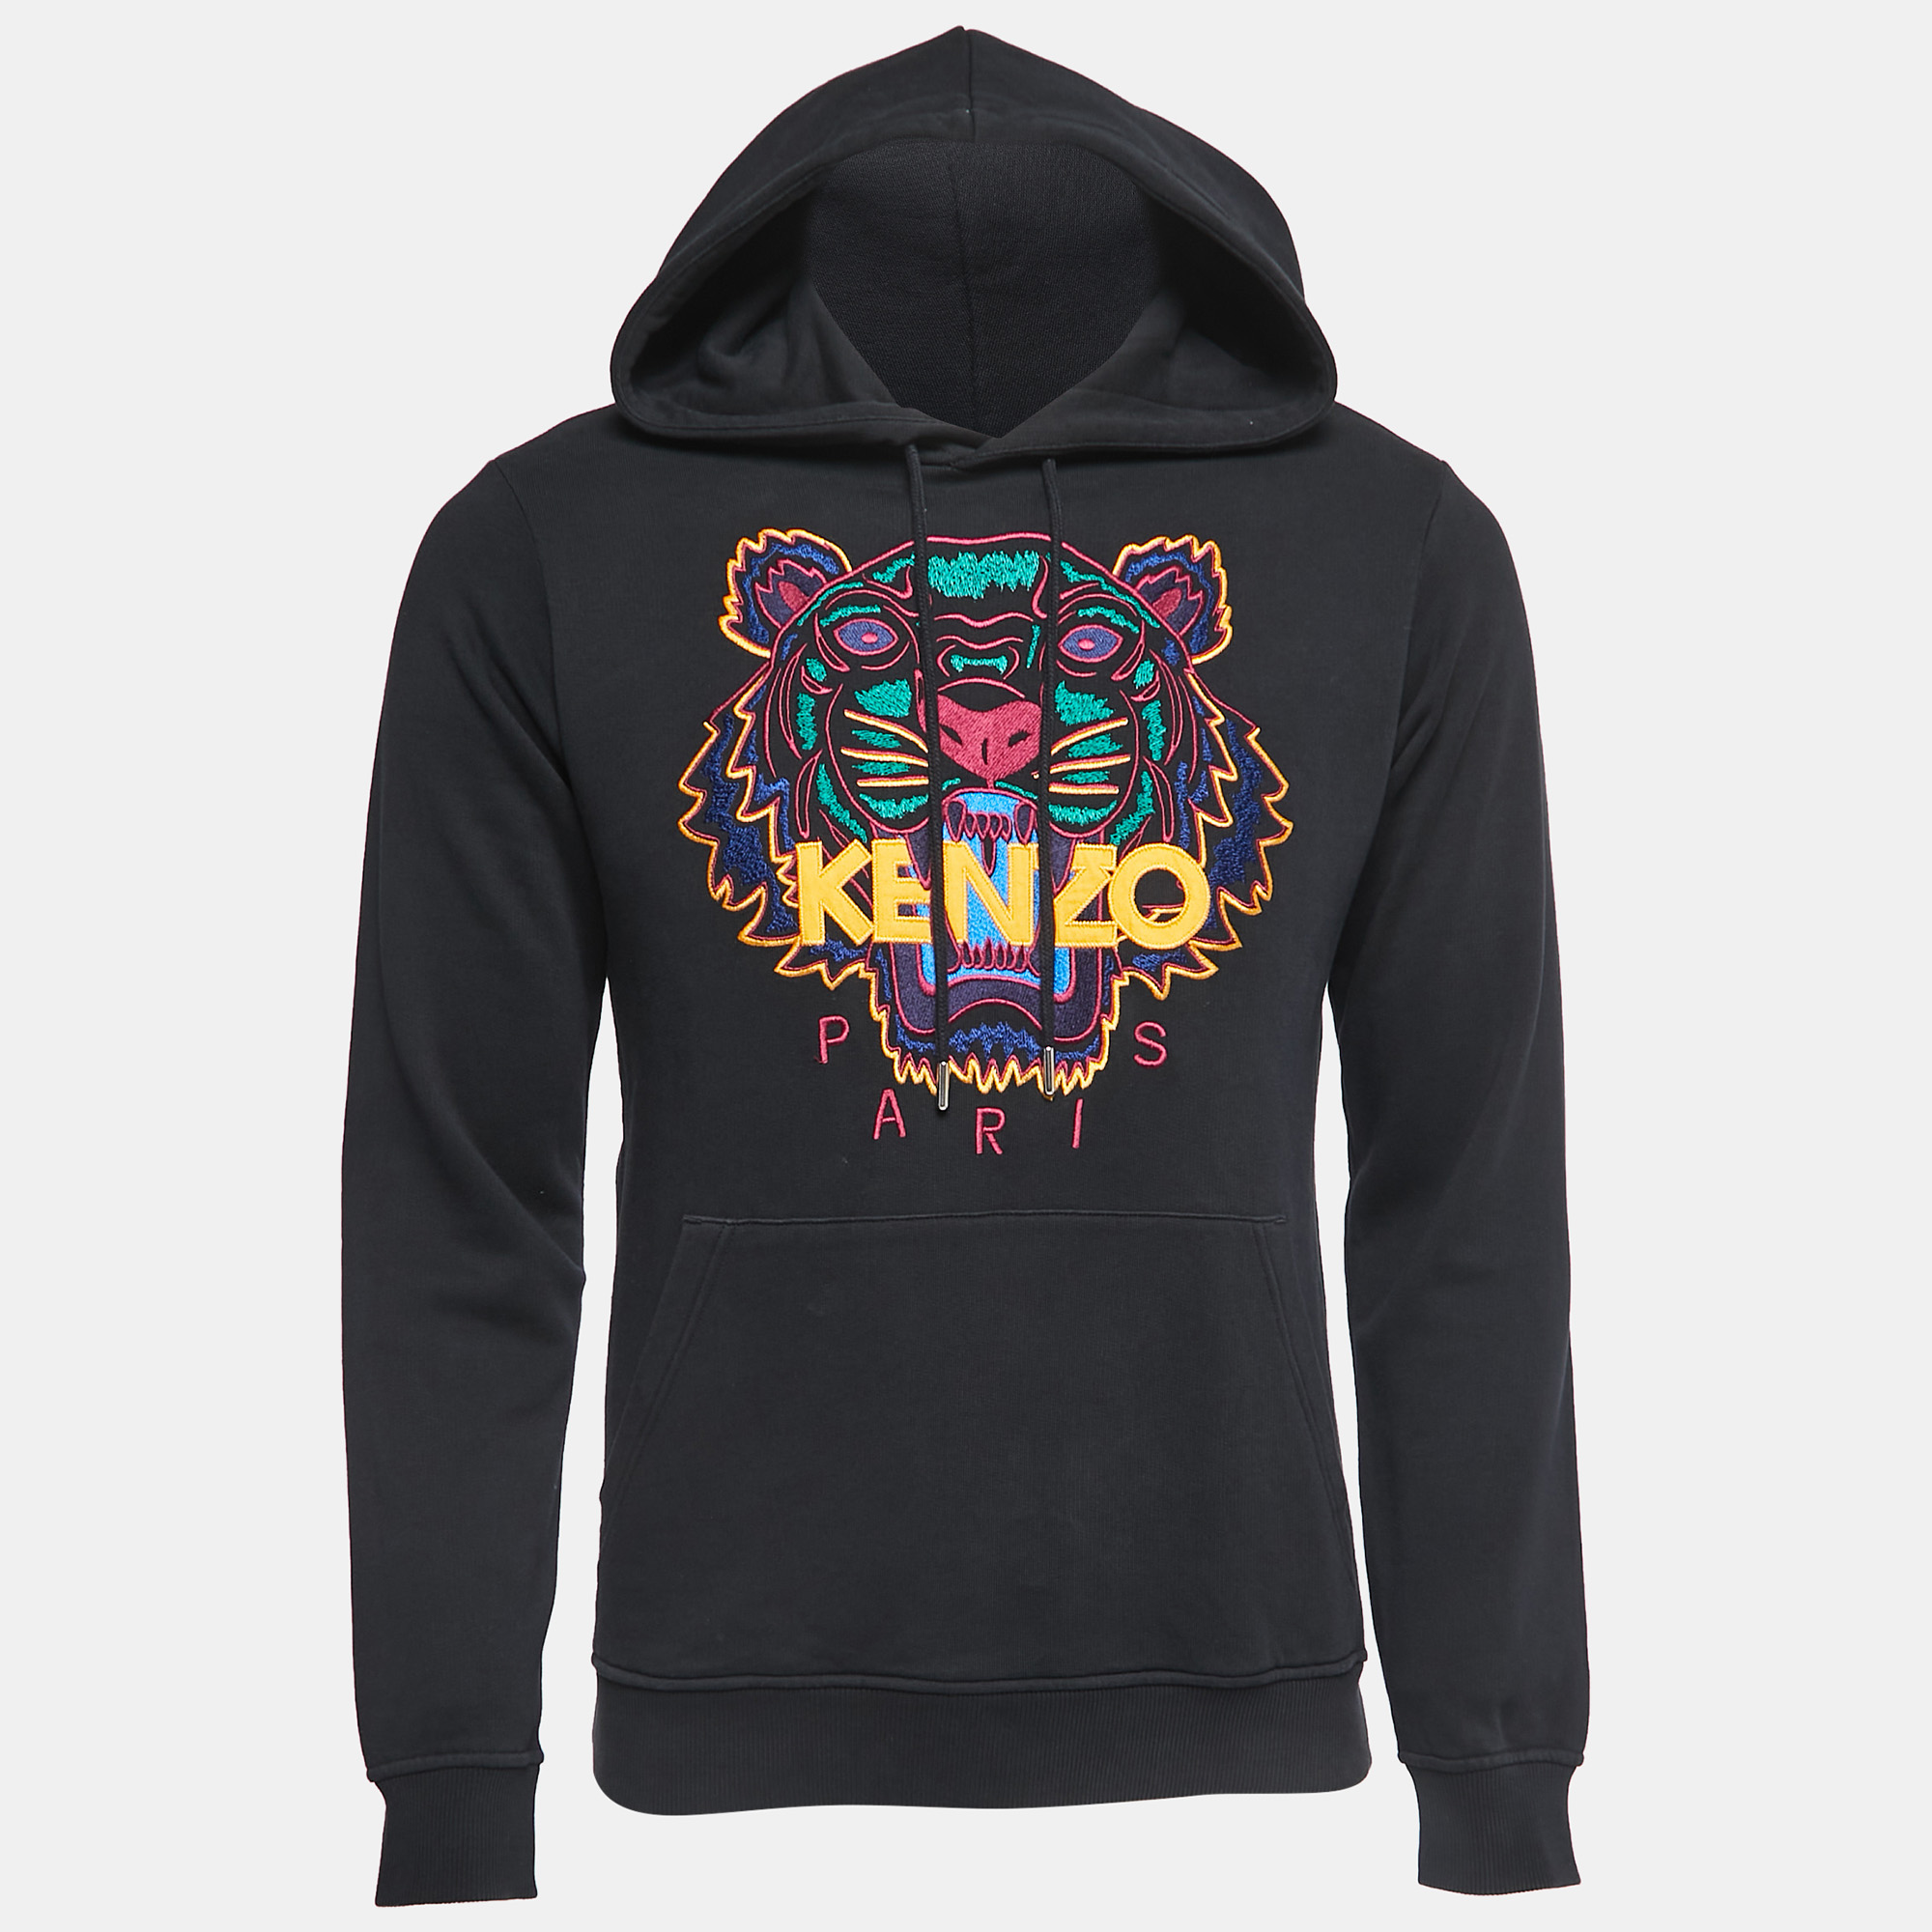 The Kenzo hoodie exudes urban chic. Crafted from premium cotton knit it features a sleek black hue a comfortable hood and the iconic Kenzo logo delicately embroidered striking the perfect balance between style and comfort.